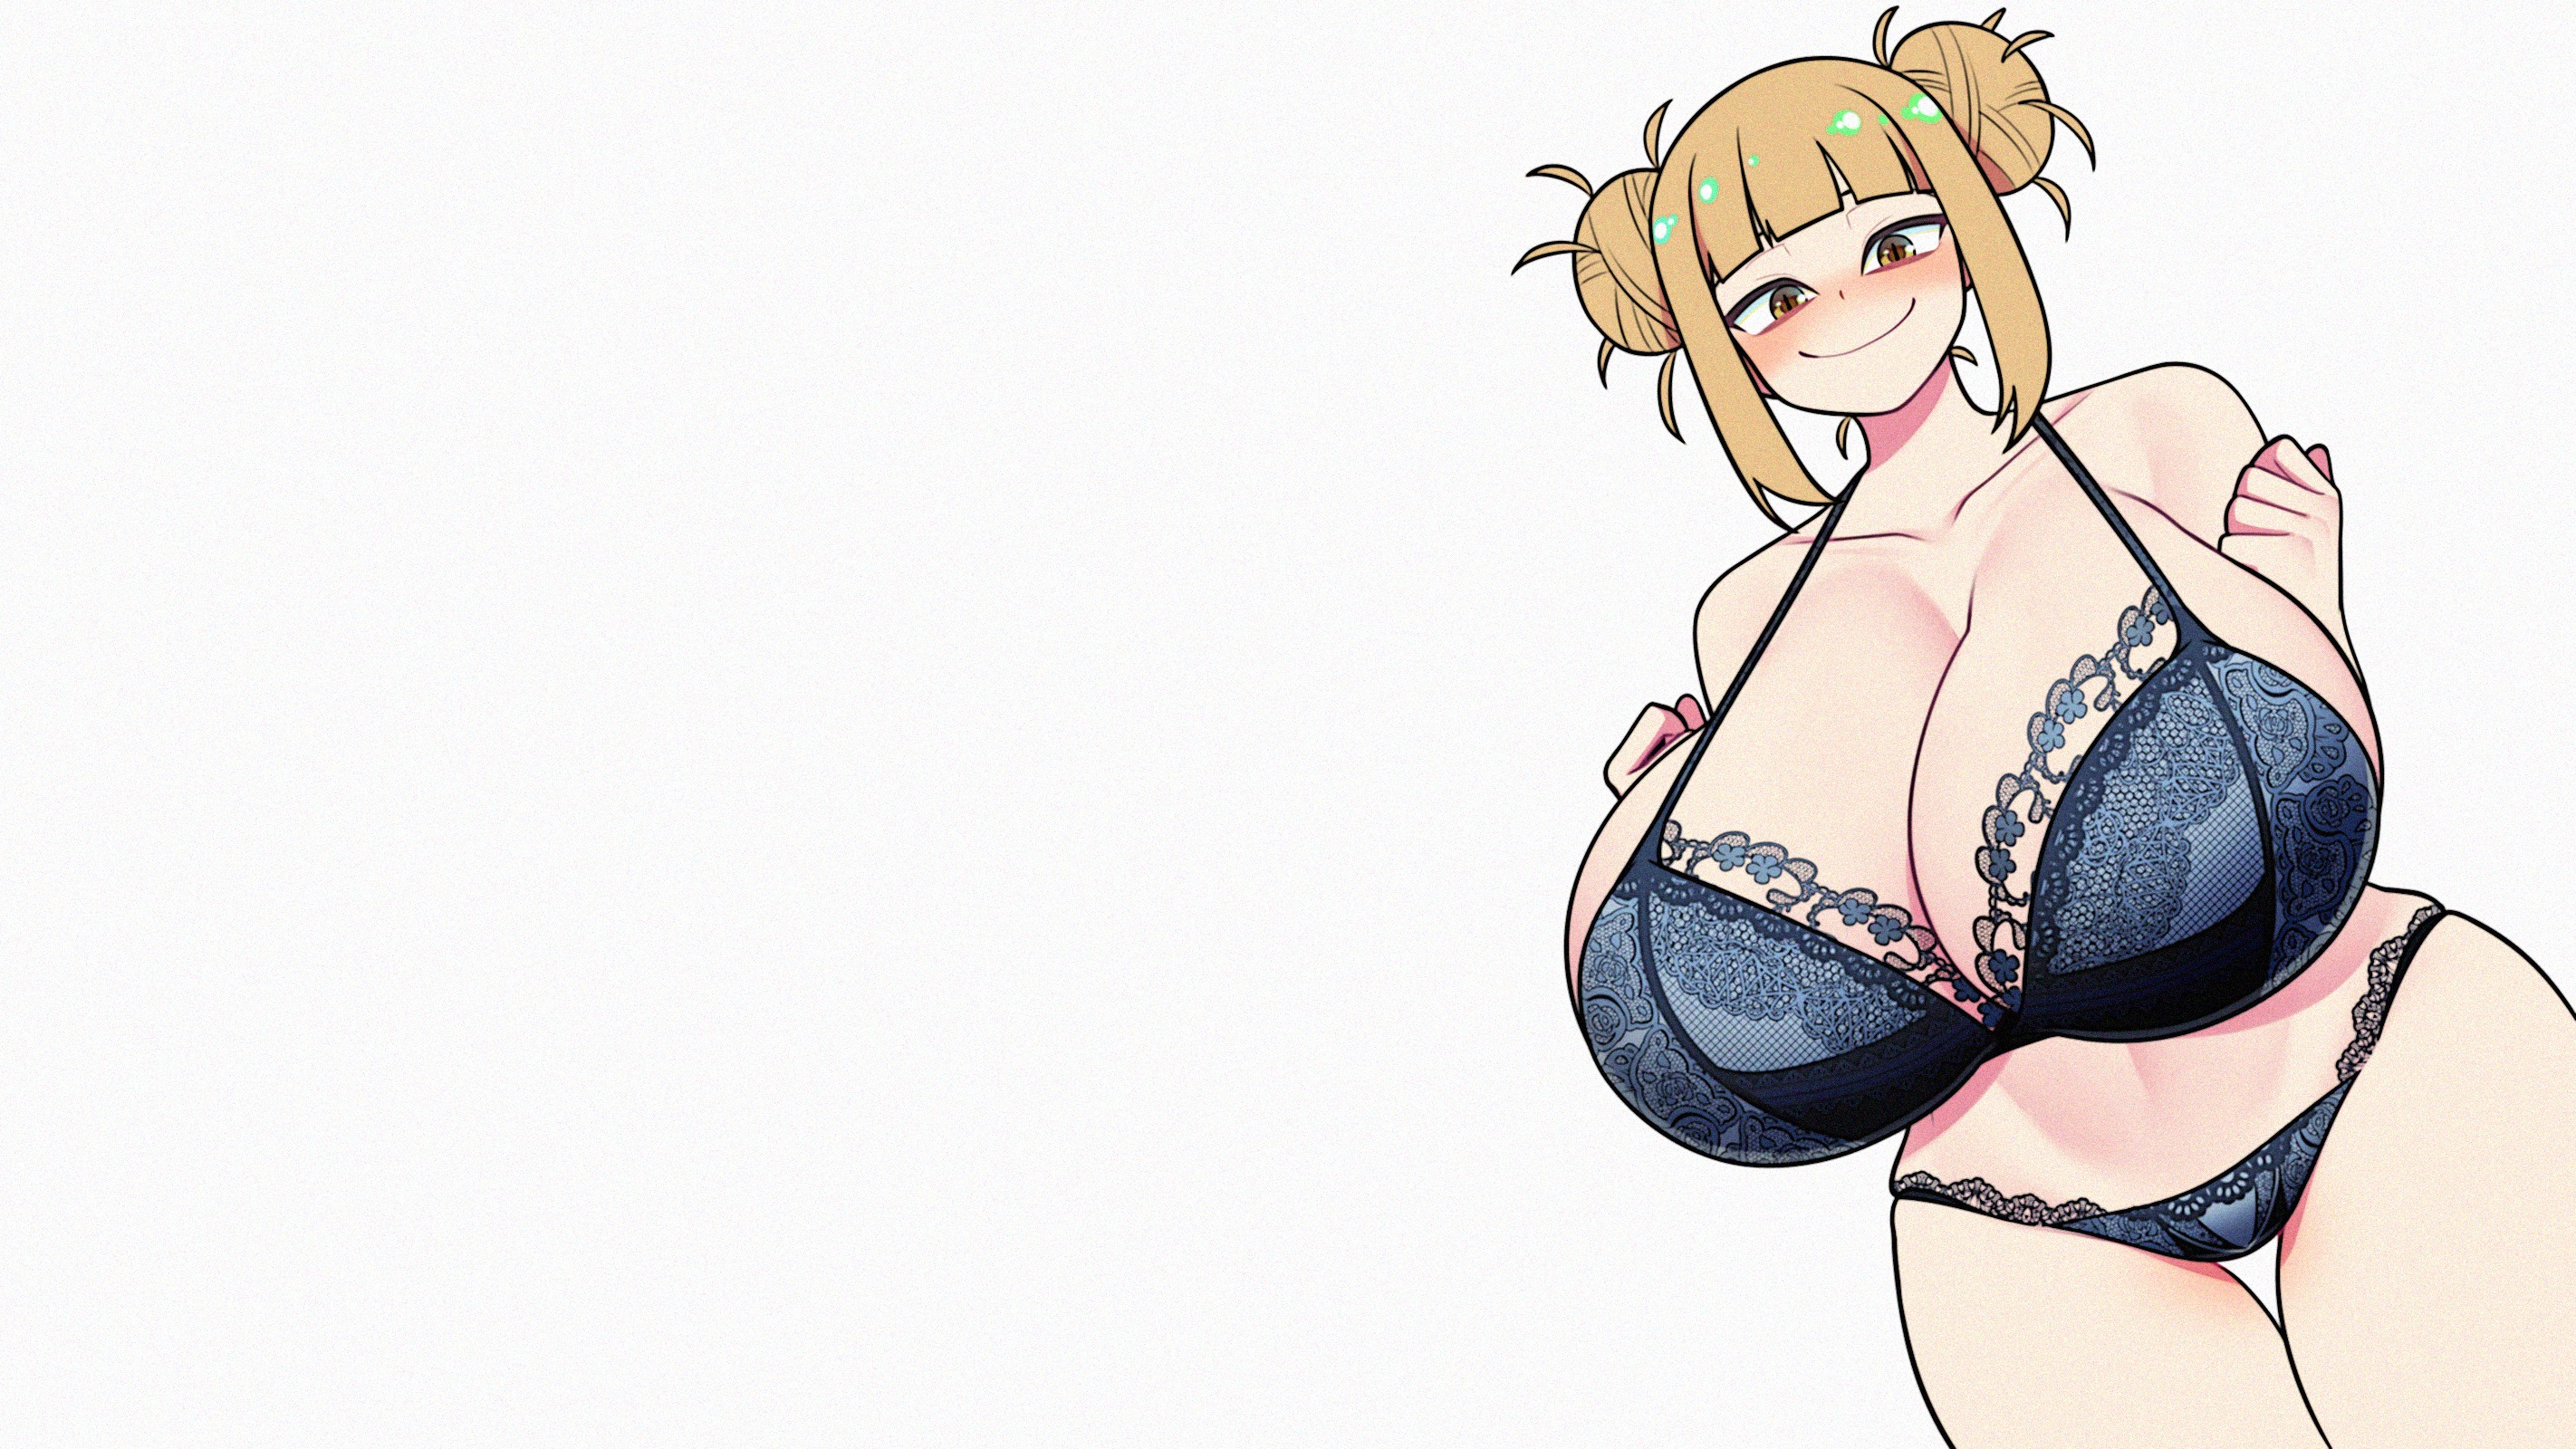 Anime 2844x1600 anime anime girls mature body wide hips thighs blushing underwear ecchi boobs big boobs huge breasts lingerie Himiko Toga minimalism hairbun white background simple background looking at viewer cleavage smiling